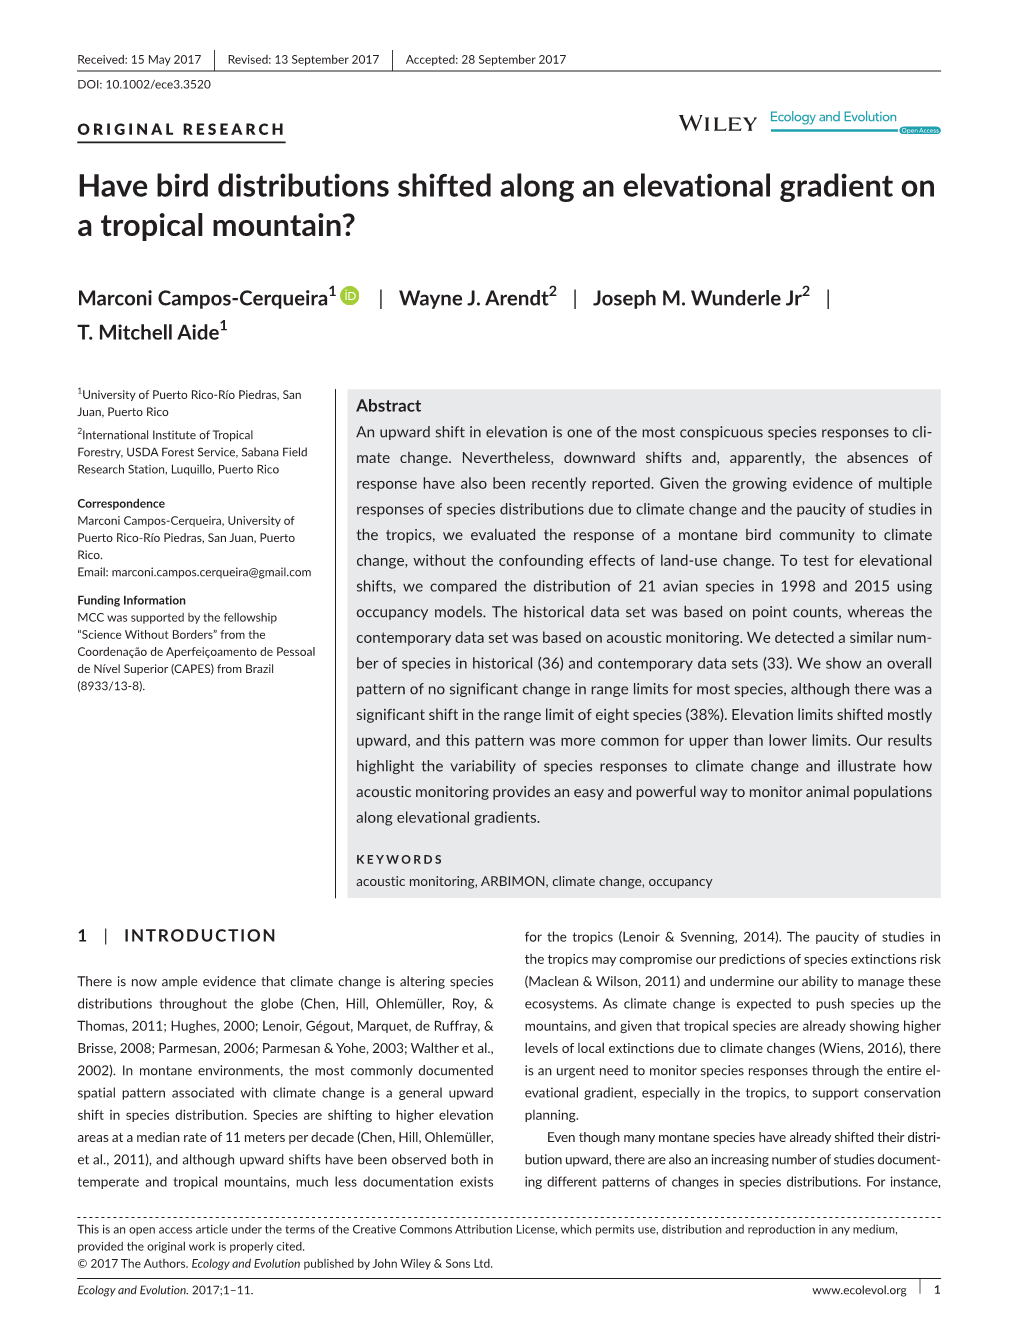 Have Bird Distributions Shifted Along an Elevational Gradient on a Tropical Mountain?